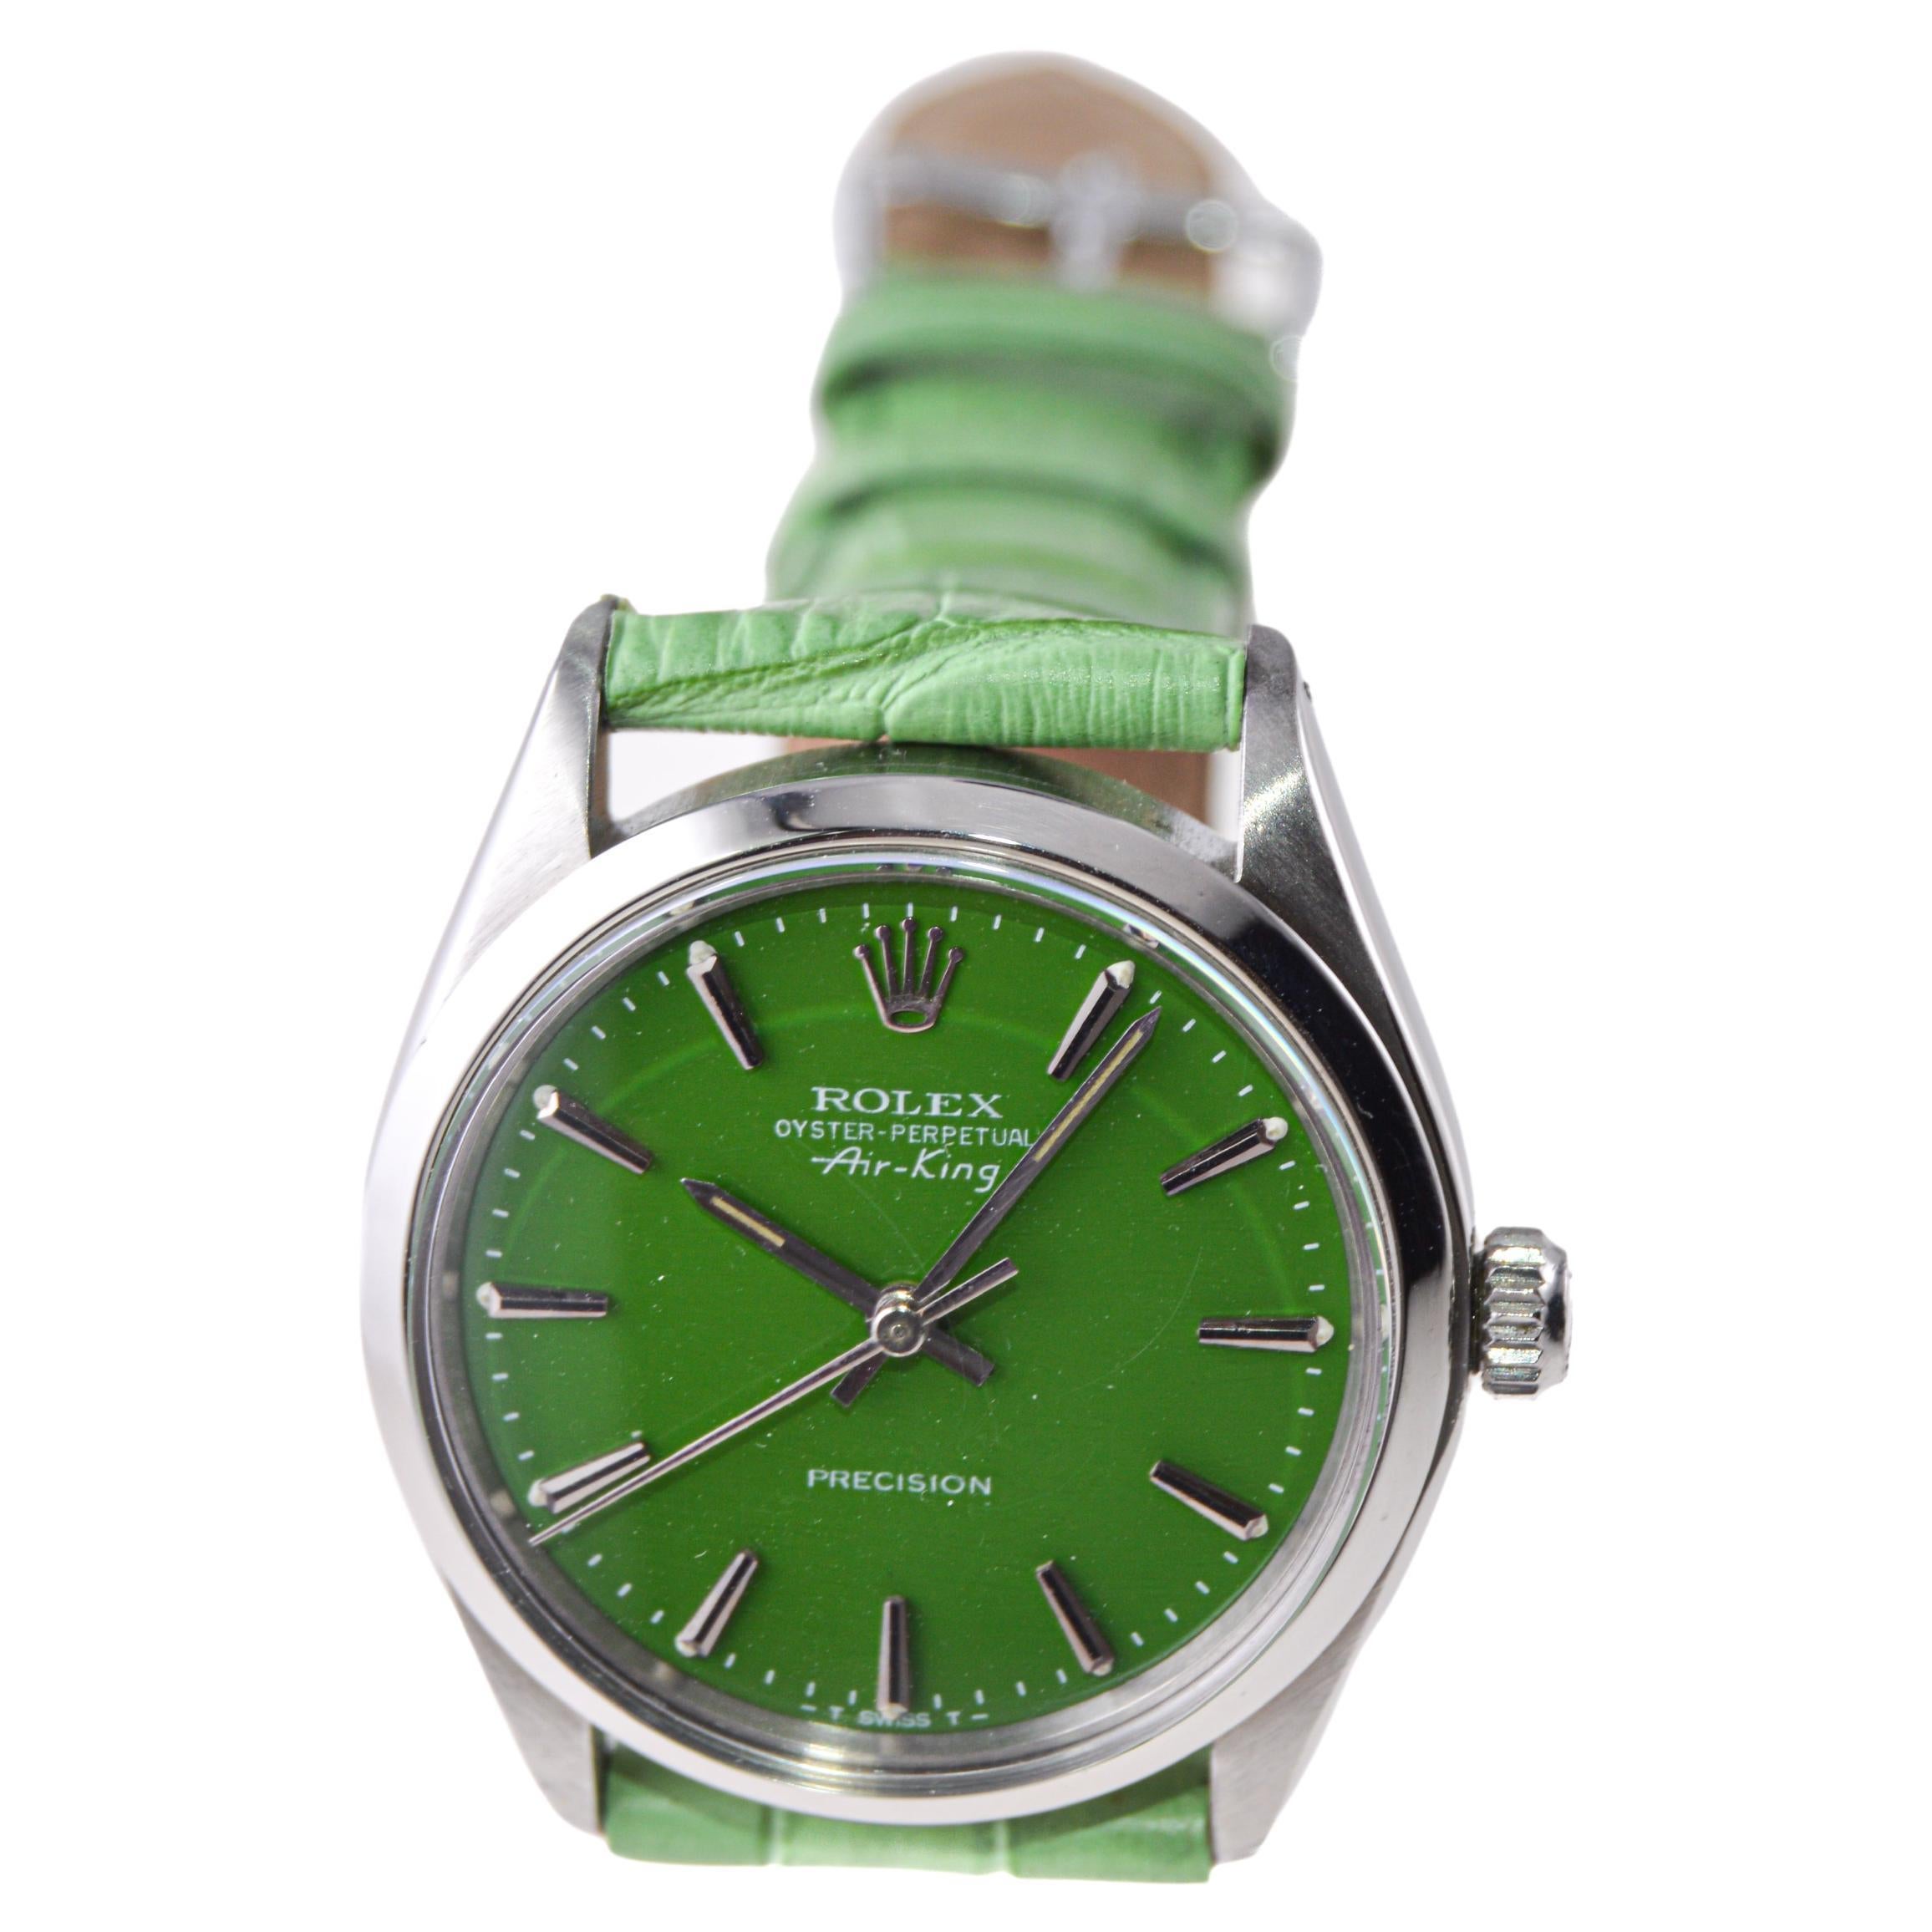 Rolex Steel Oyster Perpetual Air King with Custom Finished Green Dial, 1970's For Sale 1